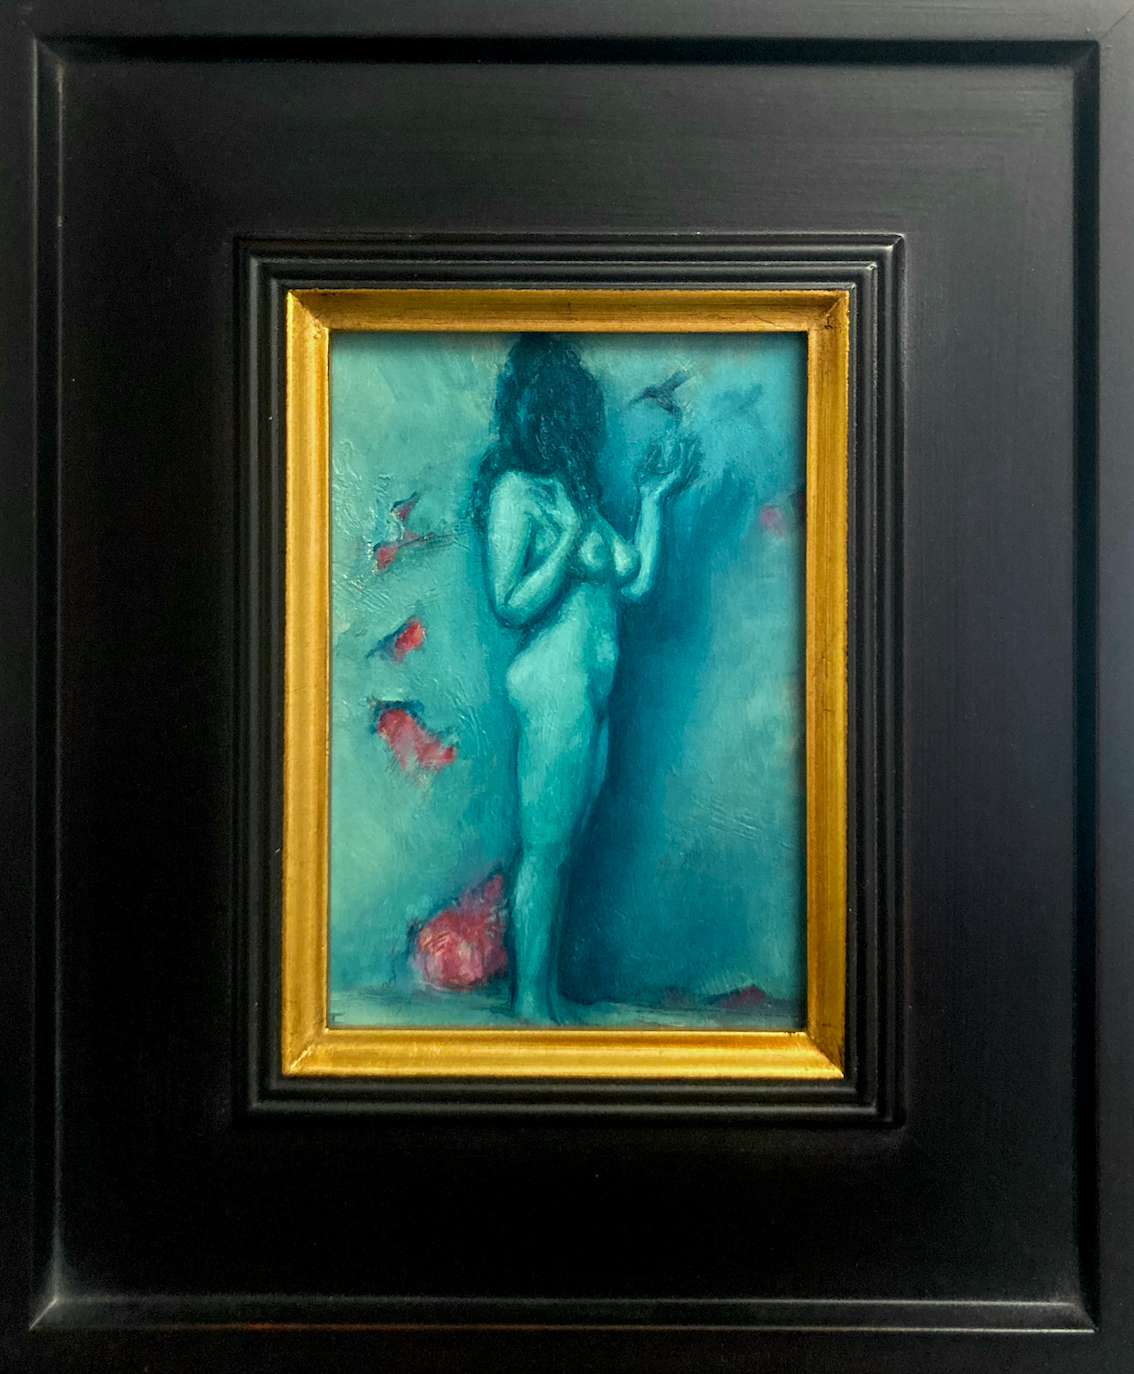 Oil painting of side view of nude woman with bird in blue shades with red highlights titled 'Little Bird' by E. E. Jacks with dark wood frame with gold trim